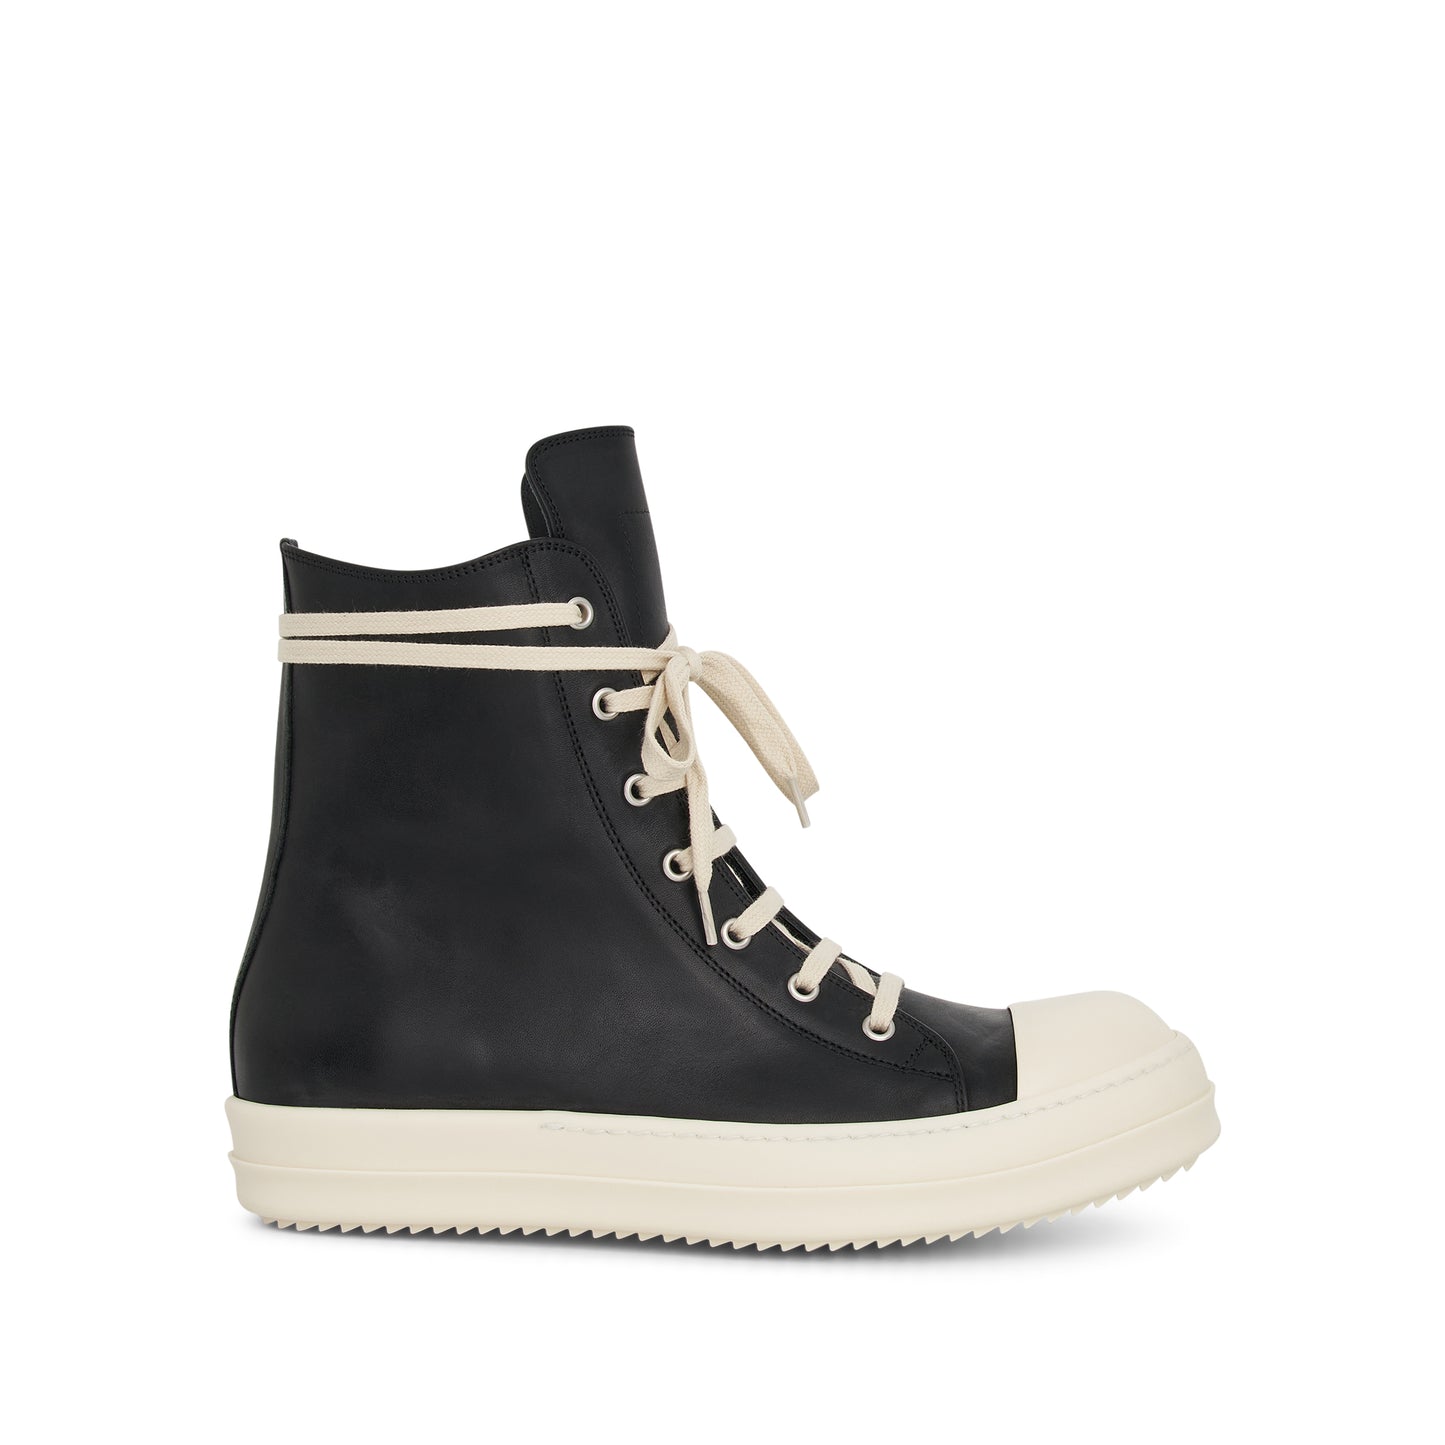 Washed Calf High Top Leather Sneaker in Black/Milk